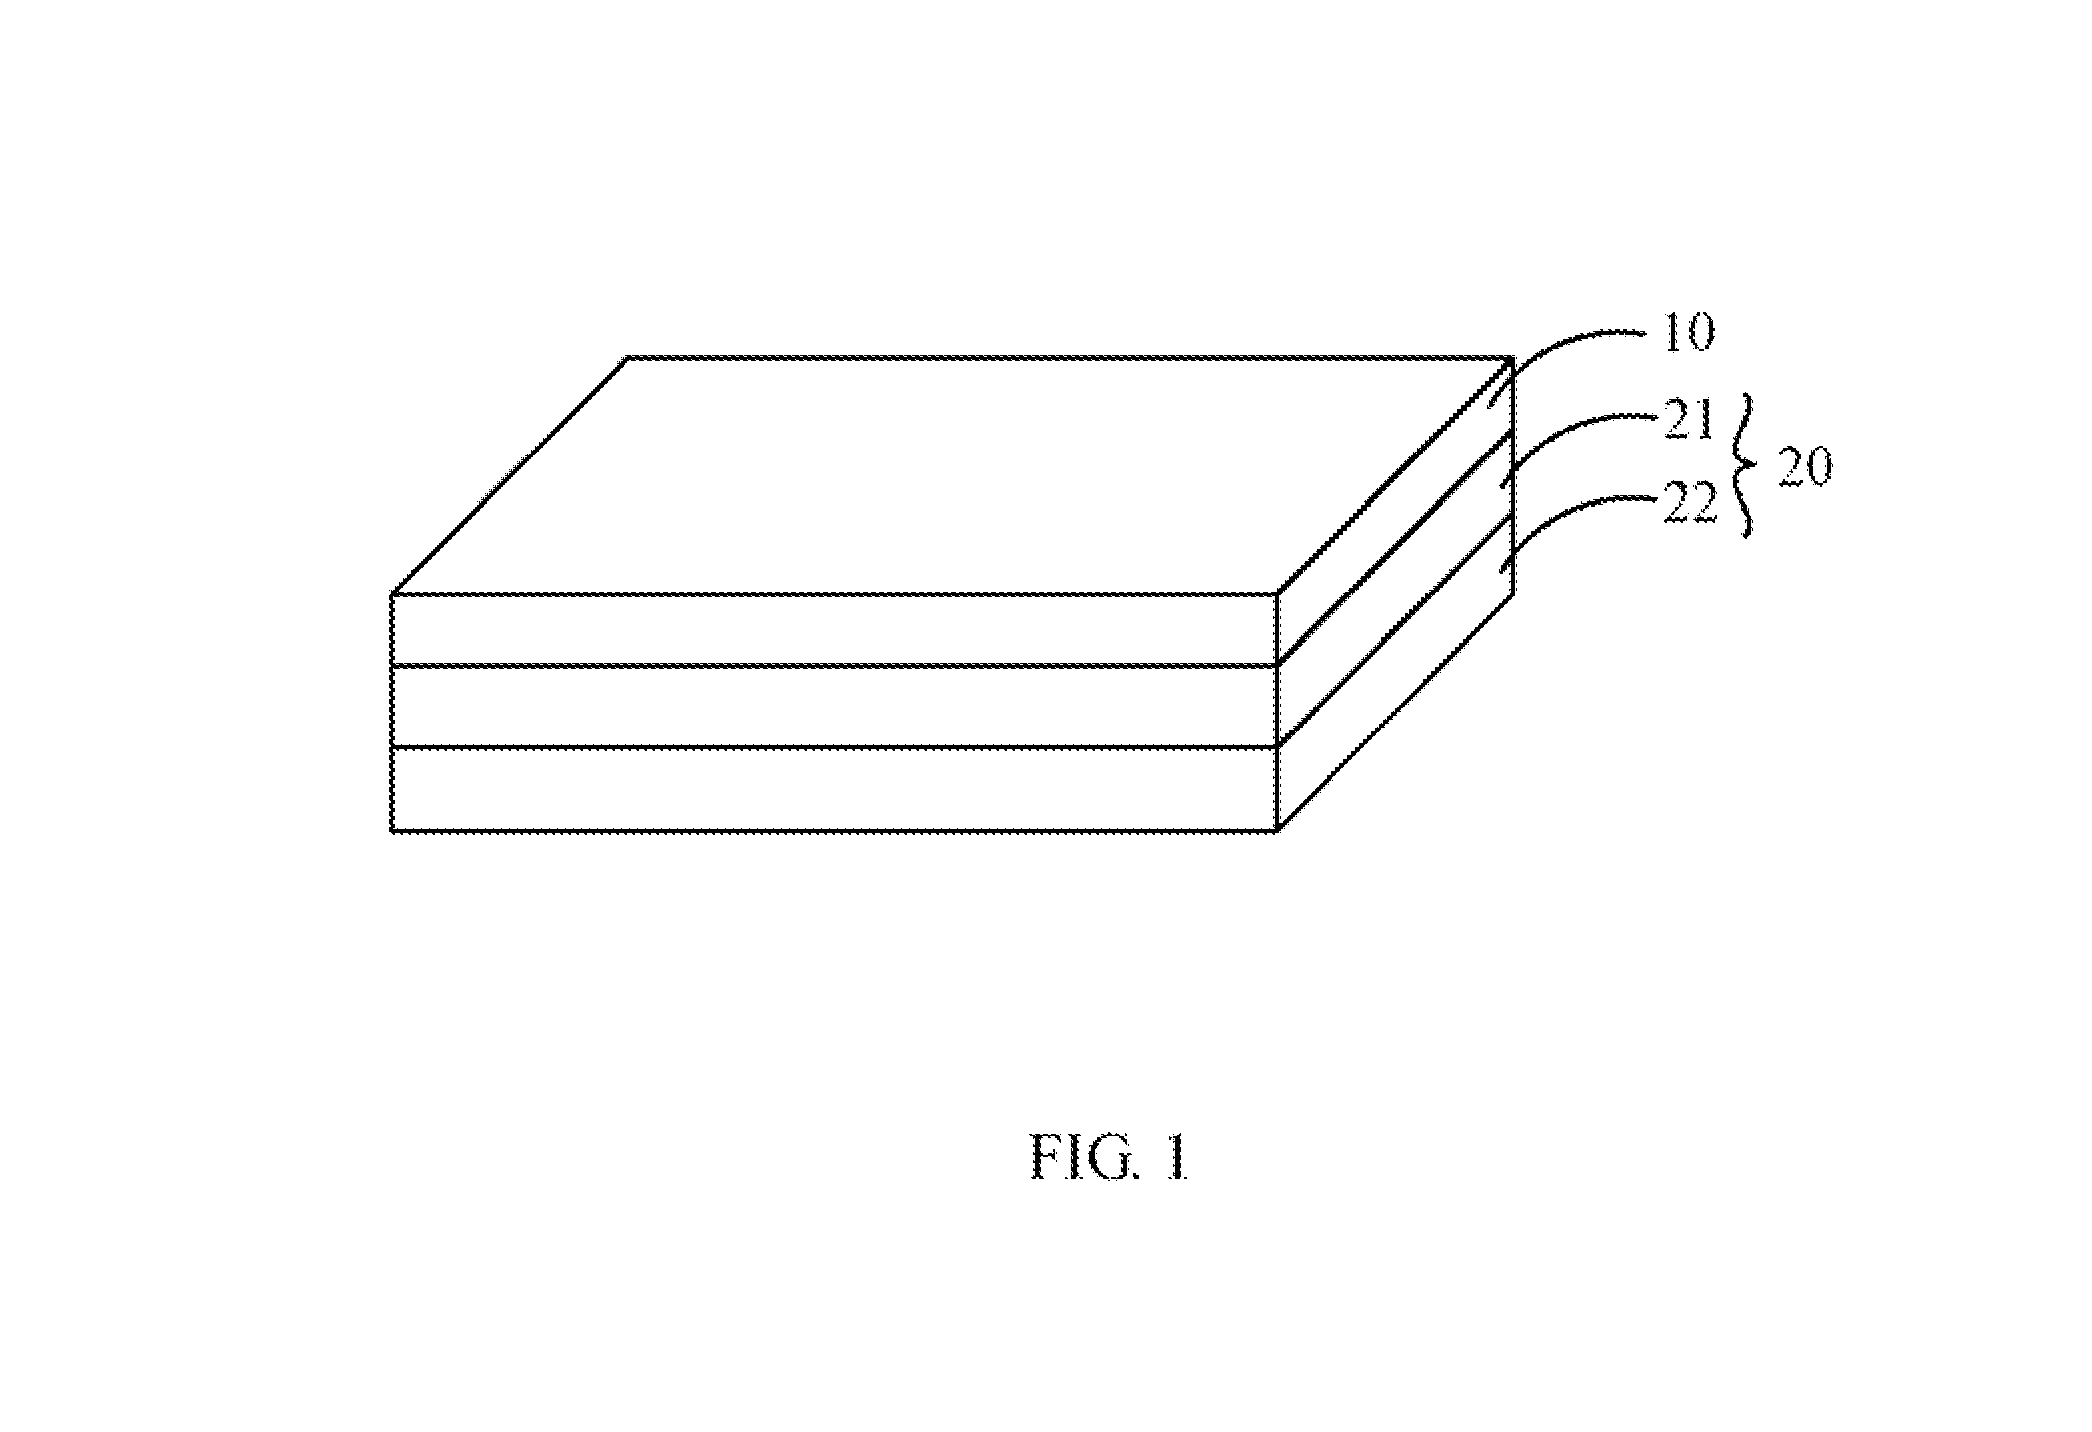 Electronic device and method for providing tactile stimulation